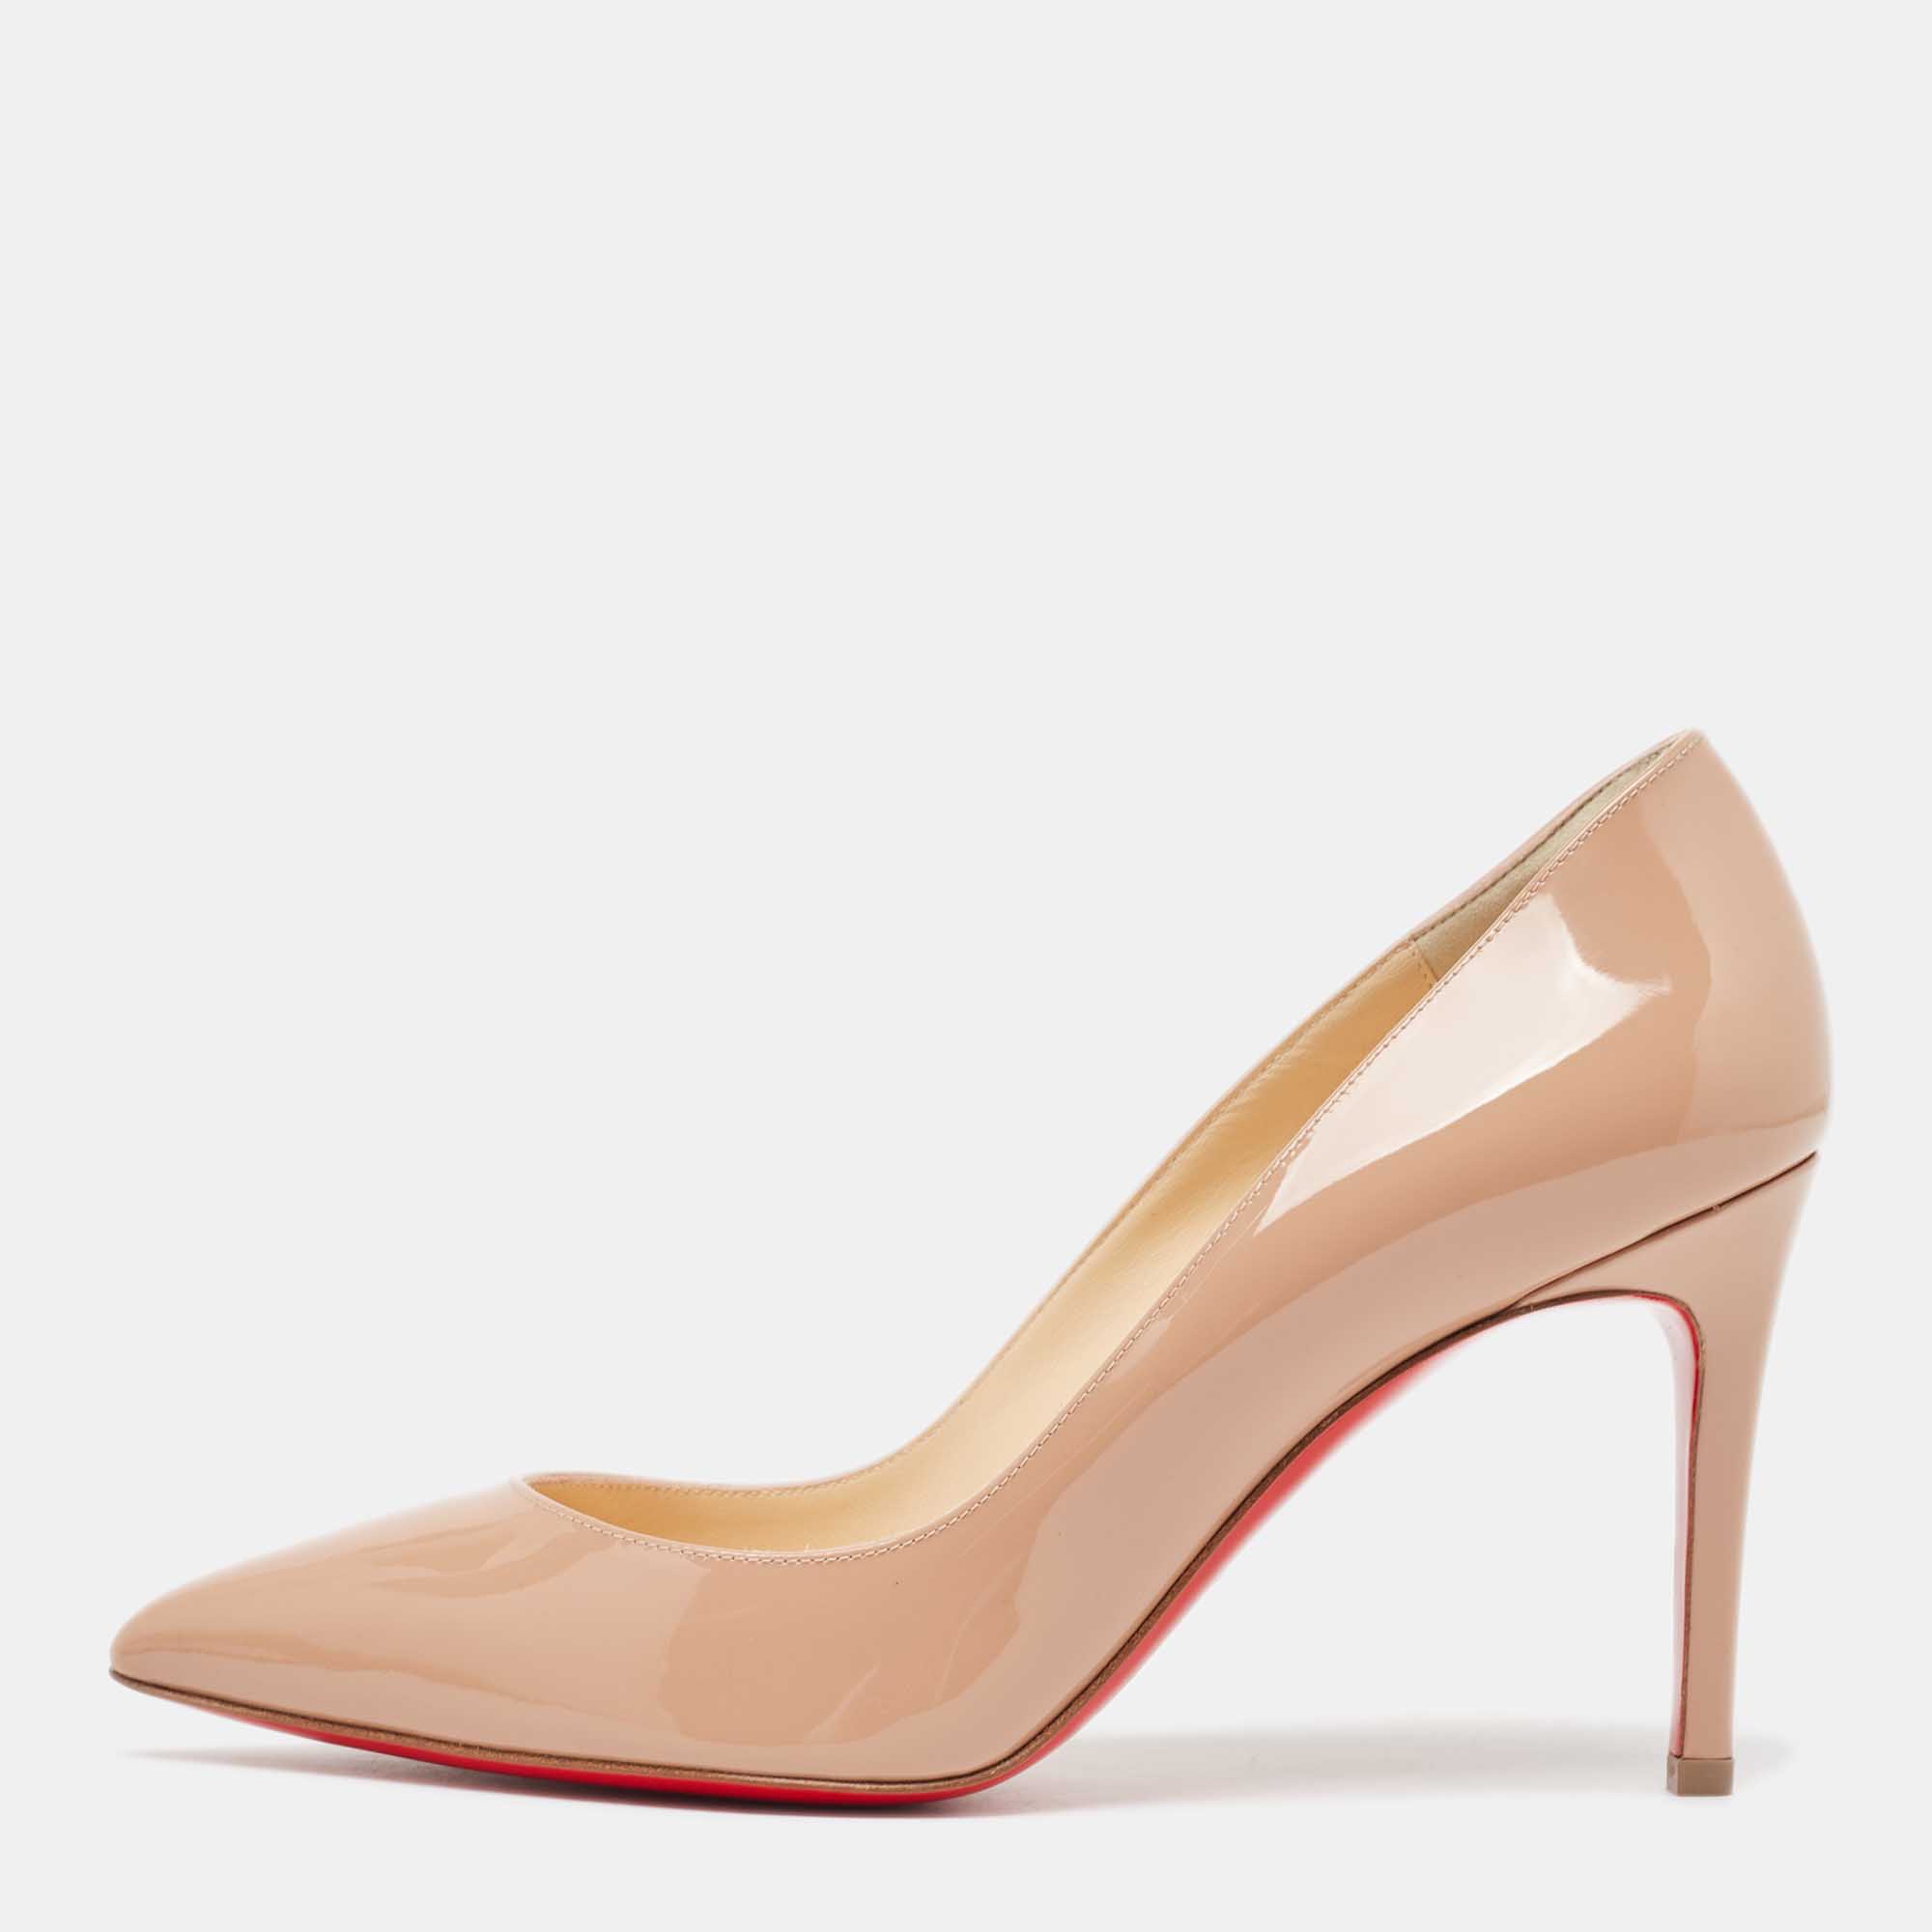 Christian louboutin beige patent leather pigalle pumps size 37